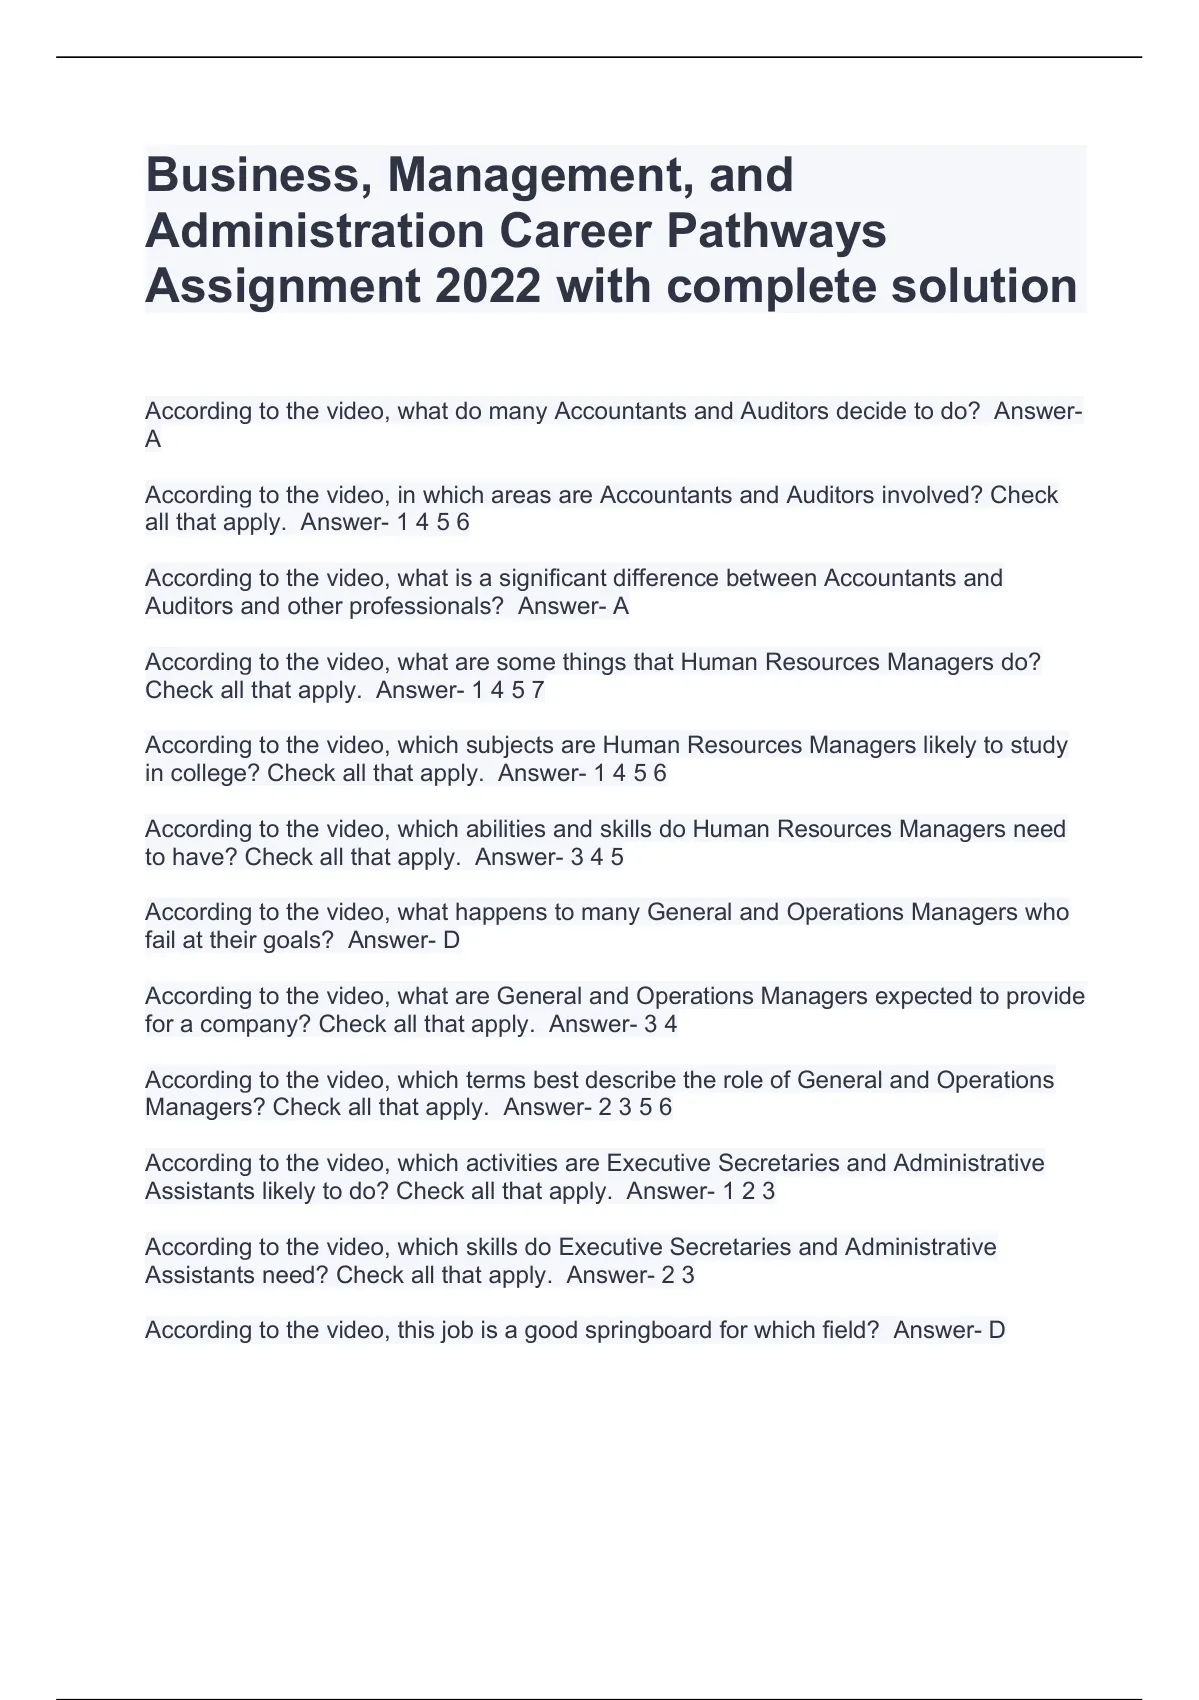 business management and administration career pathways assignment quizlet